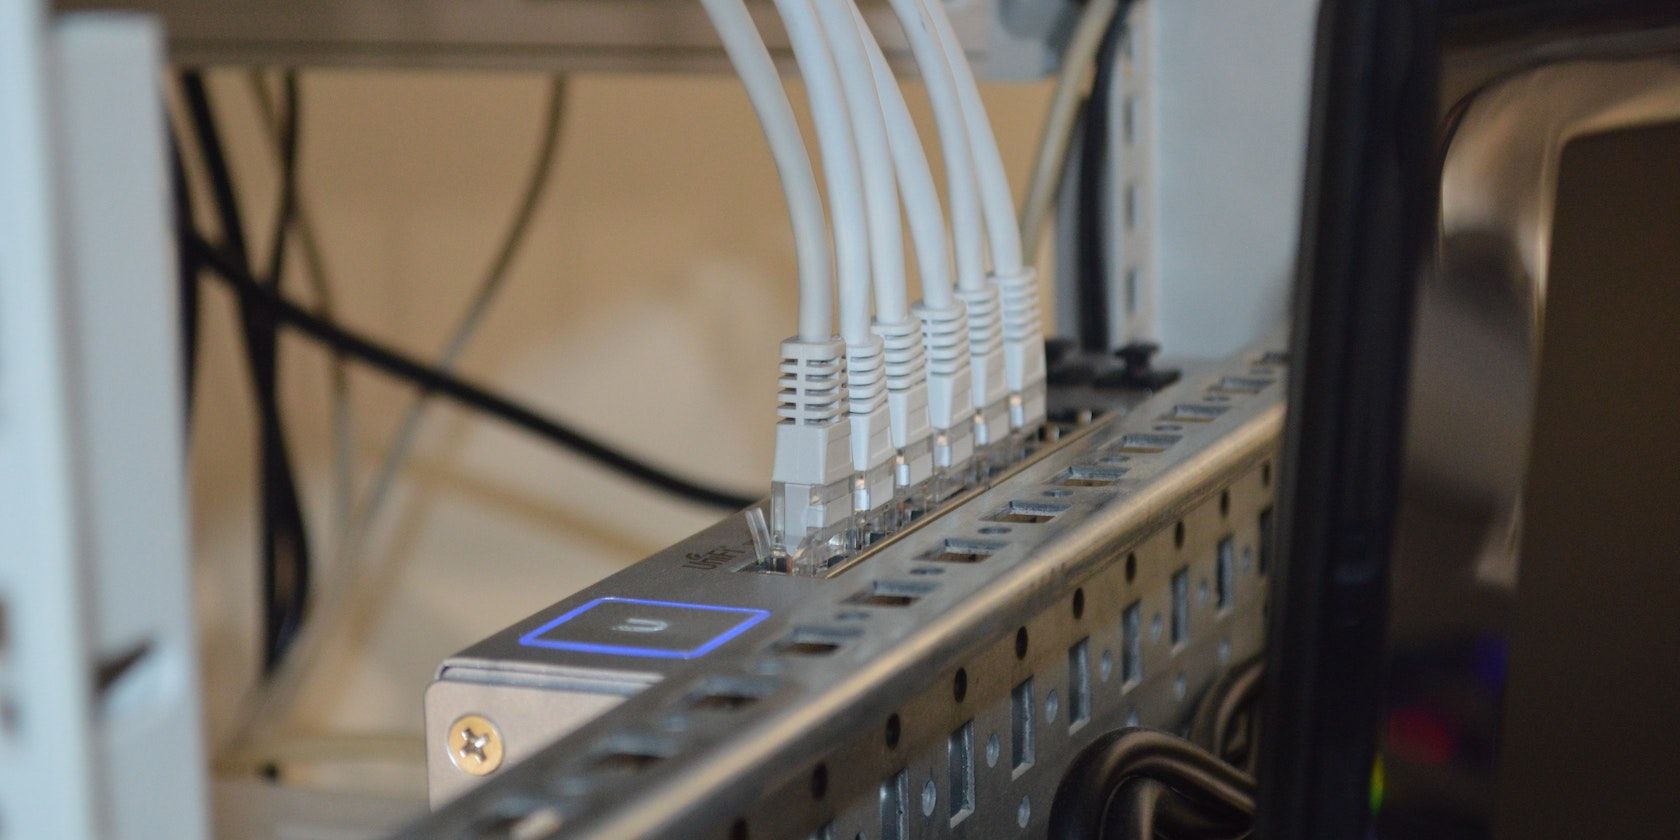 A network router with several coax cables plugged into it.